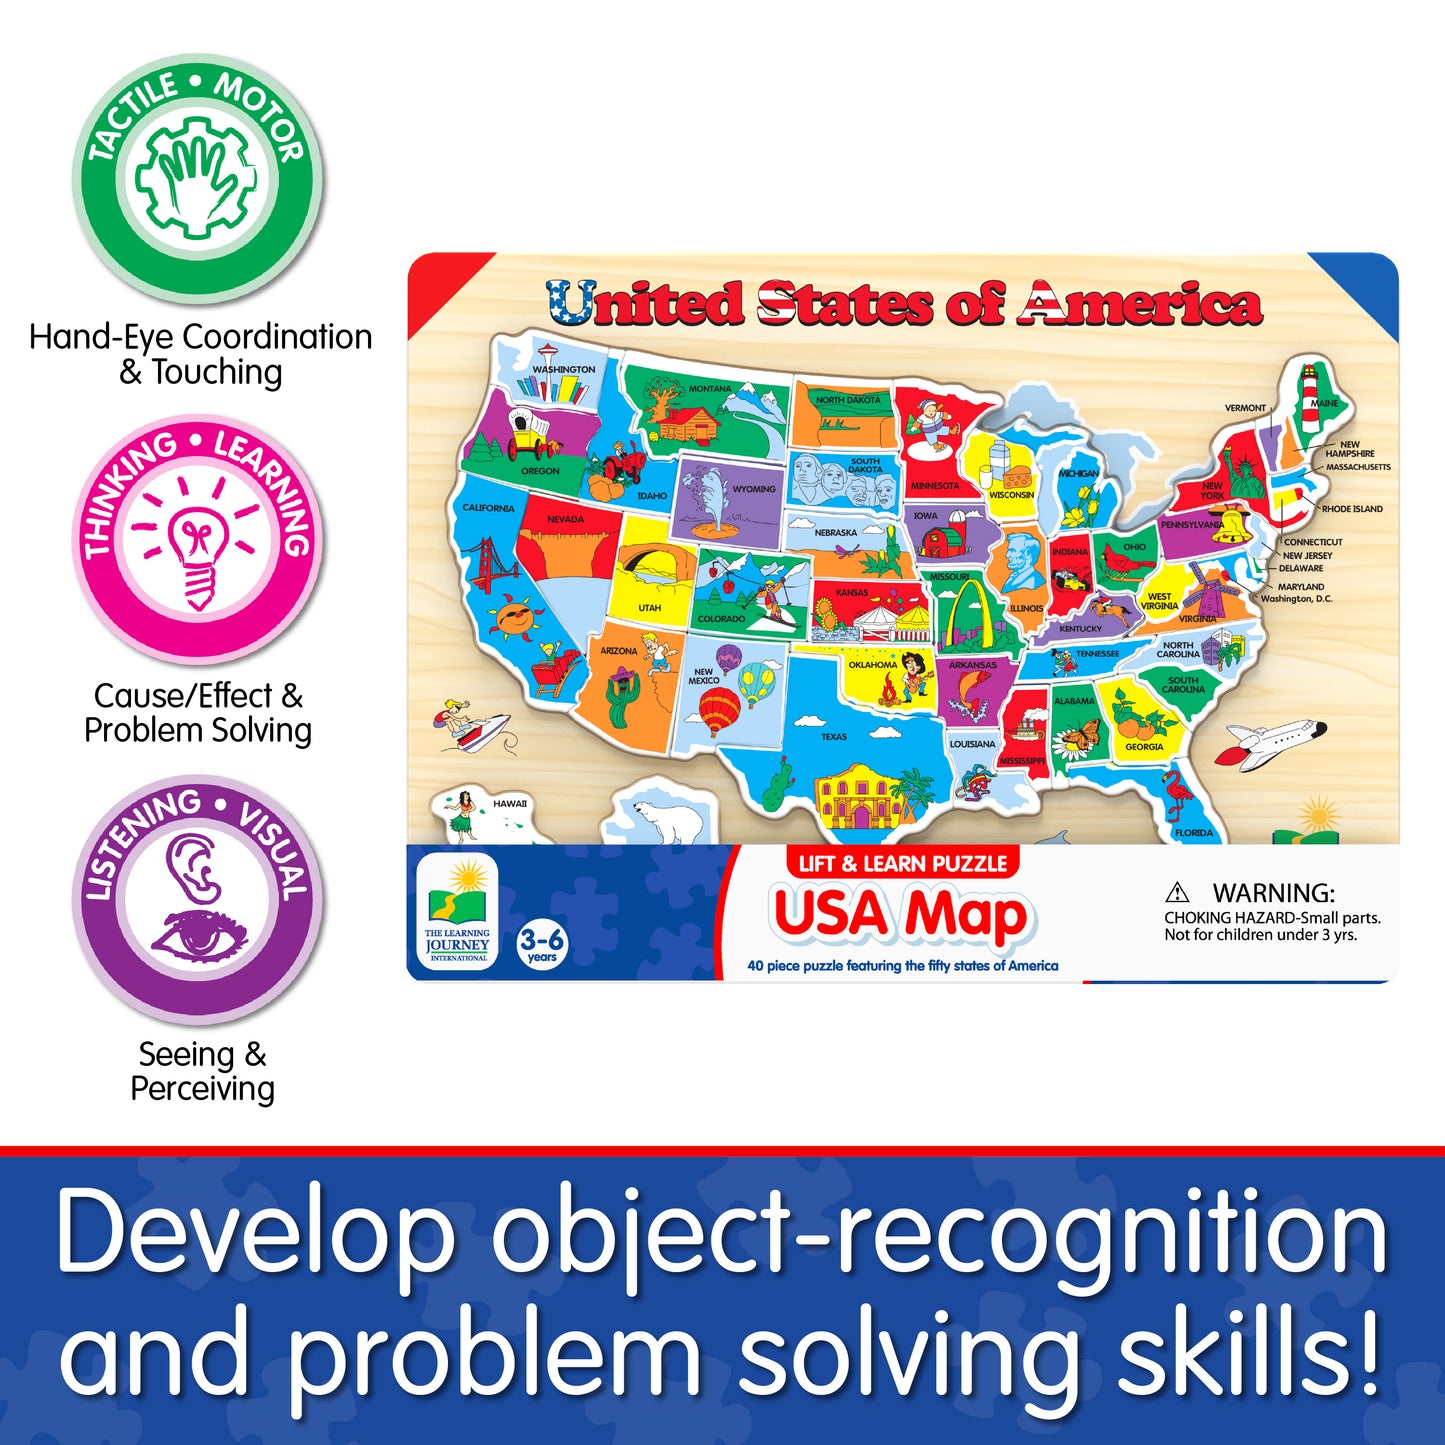 Infographic of Lift and Learn USA Map Puzzle's educational benefits that says, "Develop object-recognition and problem solving skills!"